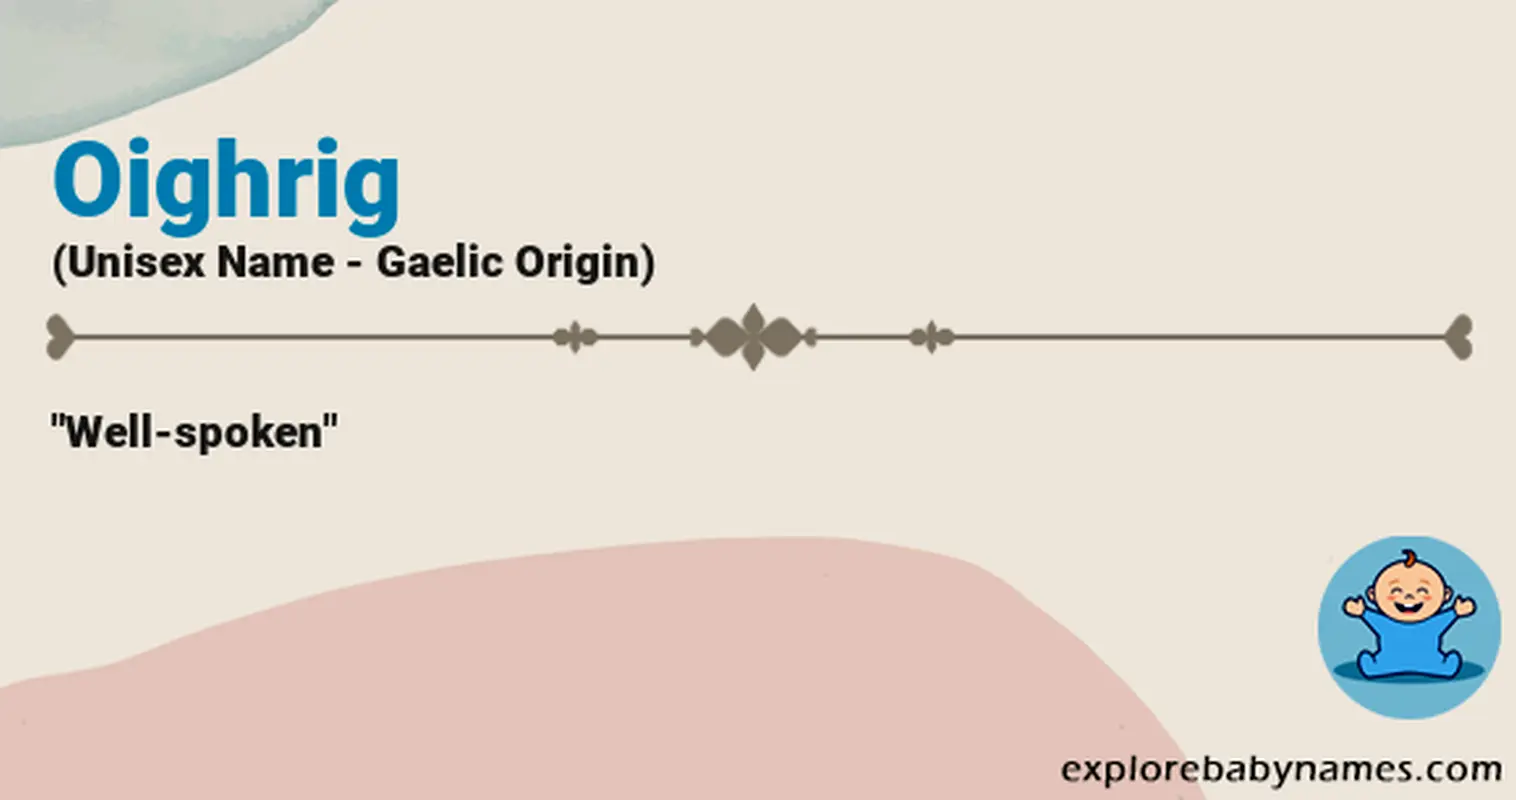 Meaning of Oighrig